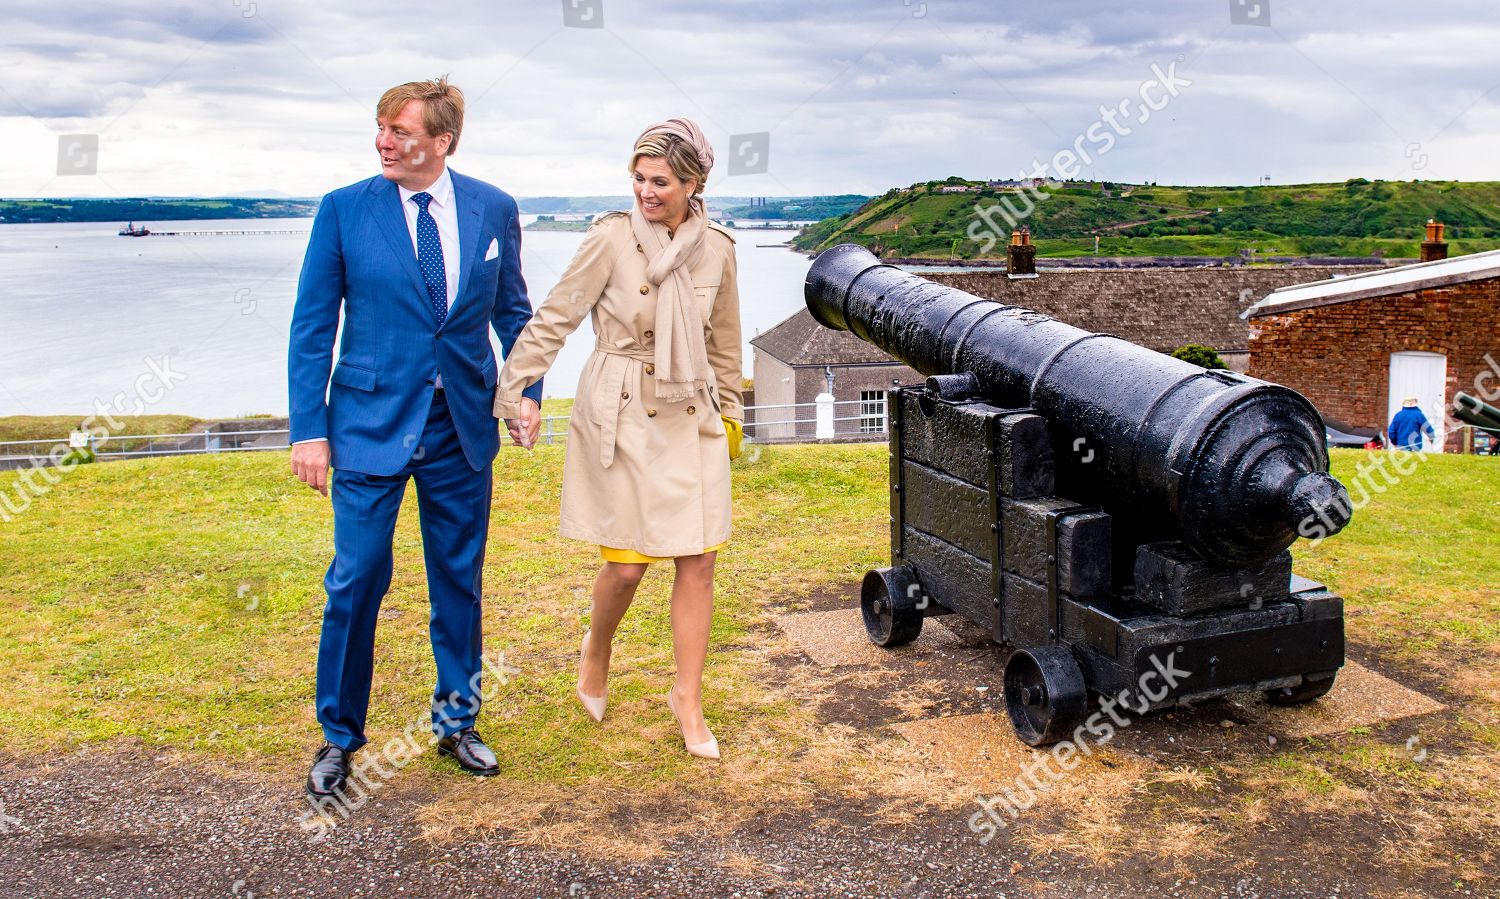 king-willem-alexander-and-queen-maxima-visit-to-ireland-shutterstock-editorial-10310598ae.jpg